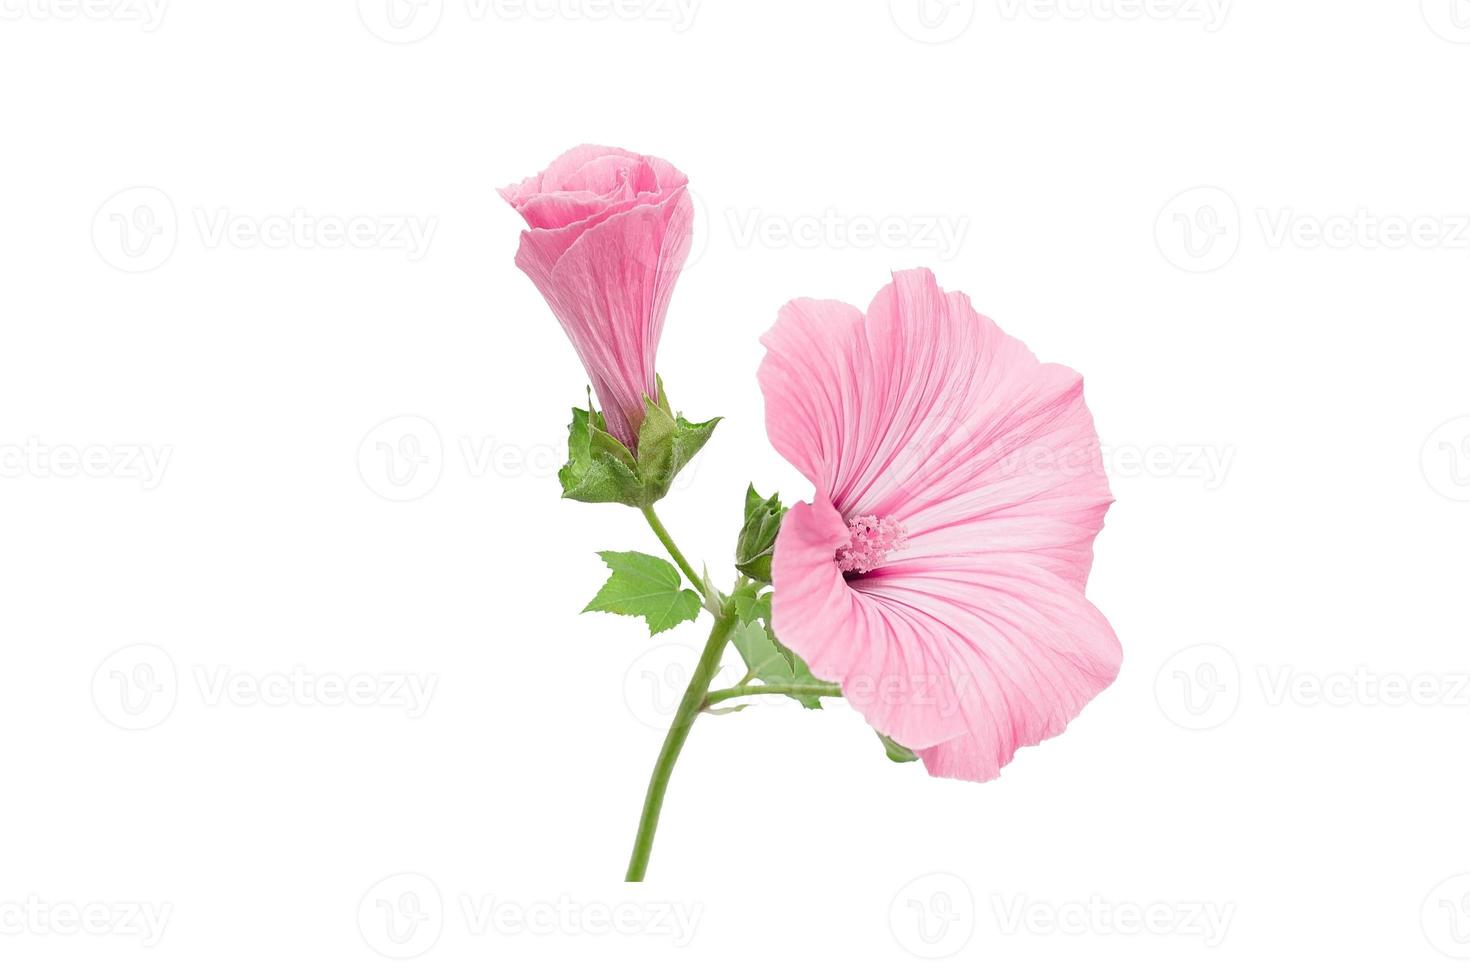 Pink Lavatera flower, bud and foliage isolated against white photo